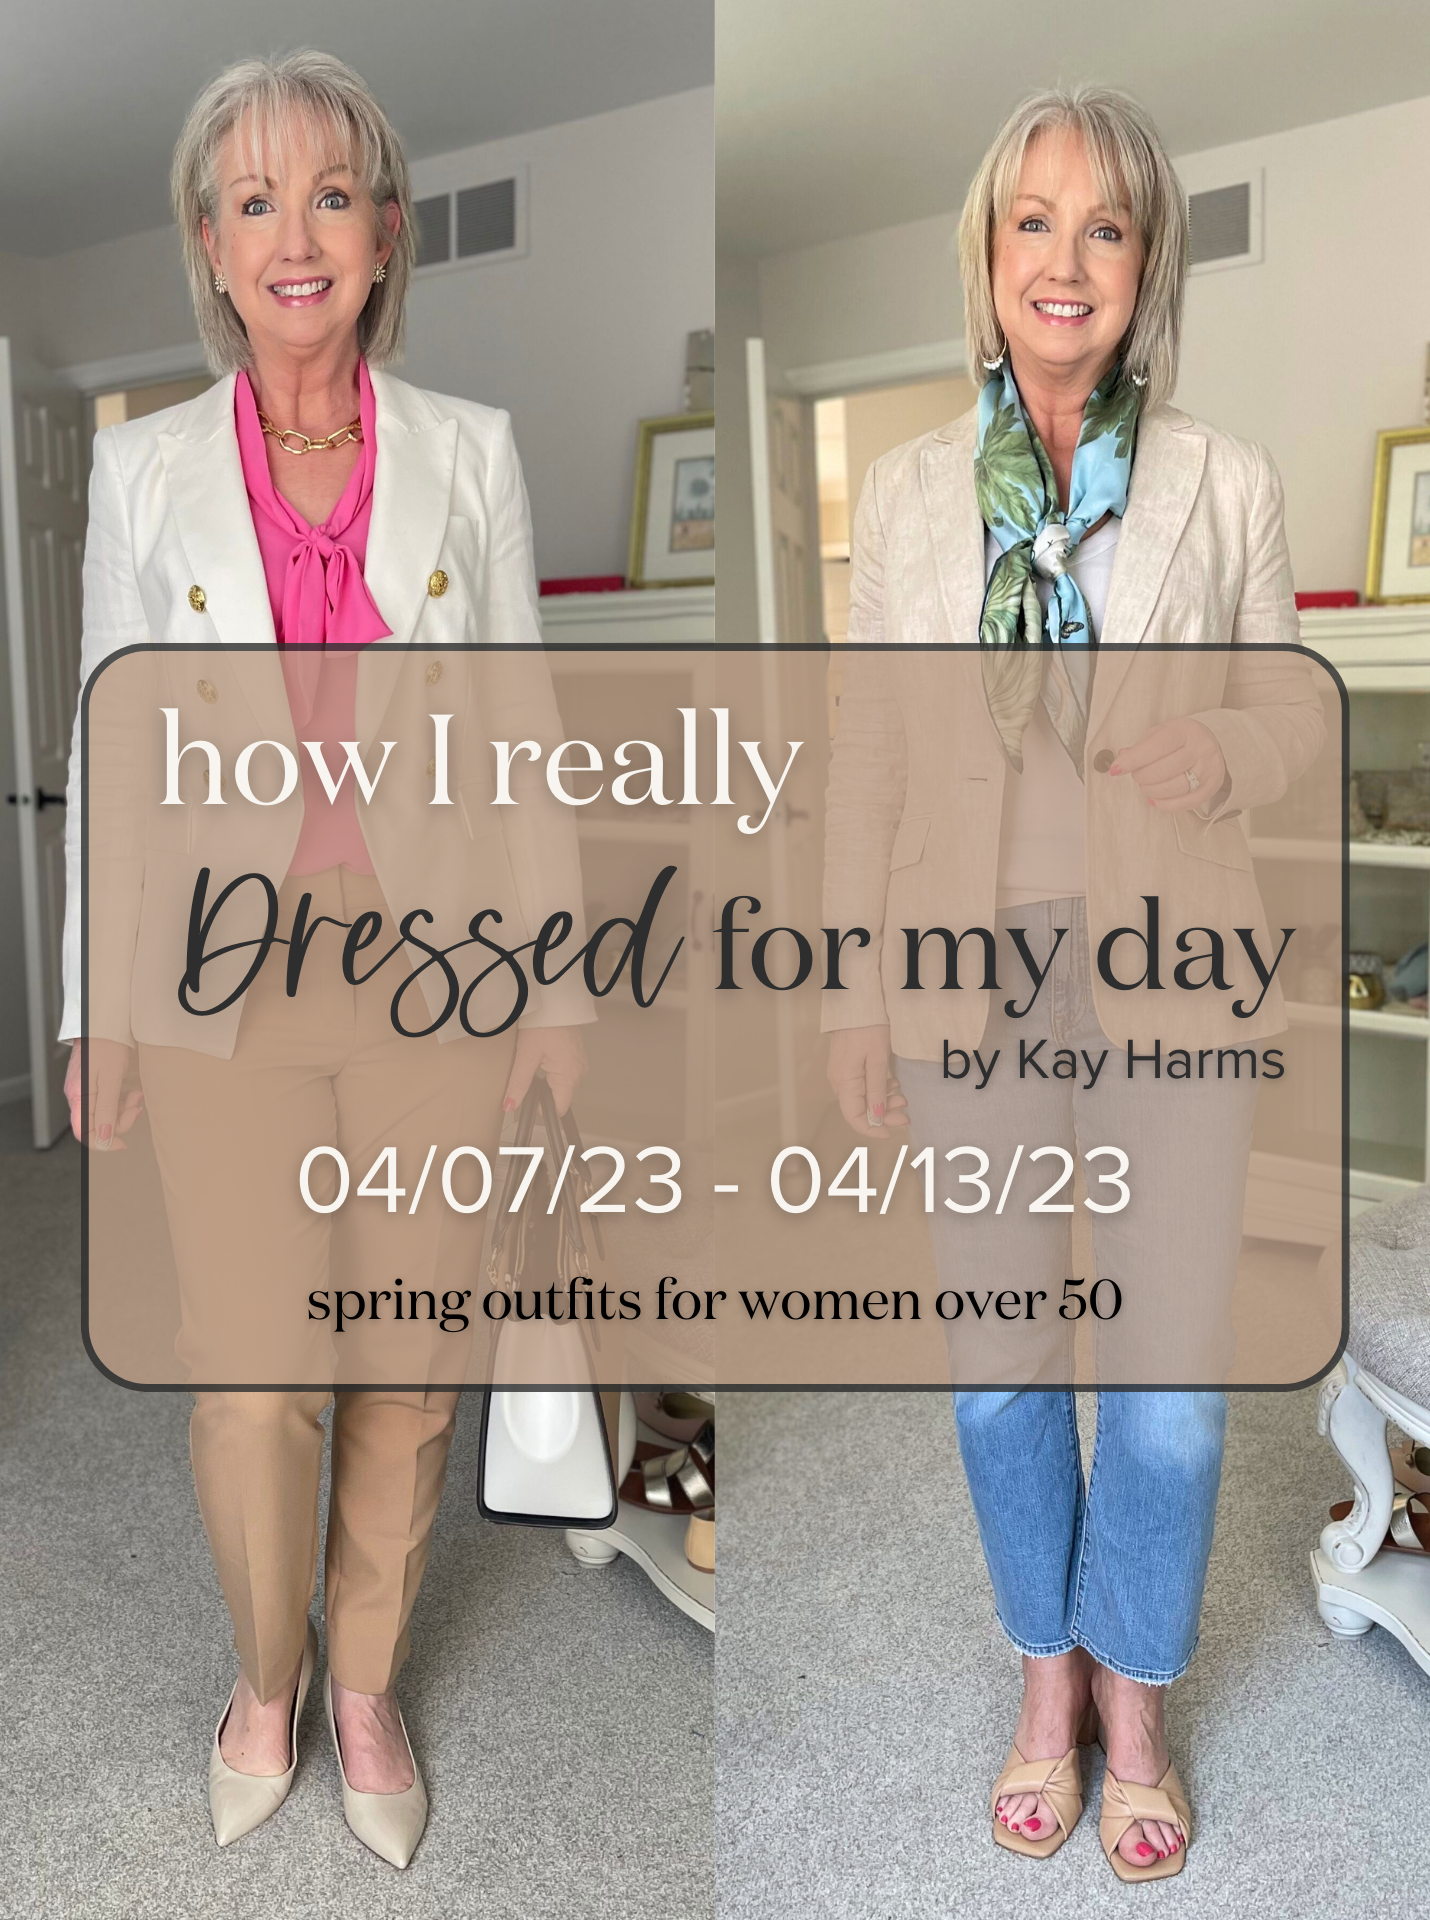 a Full Week of Spring Outfits